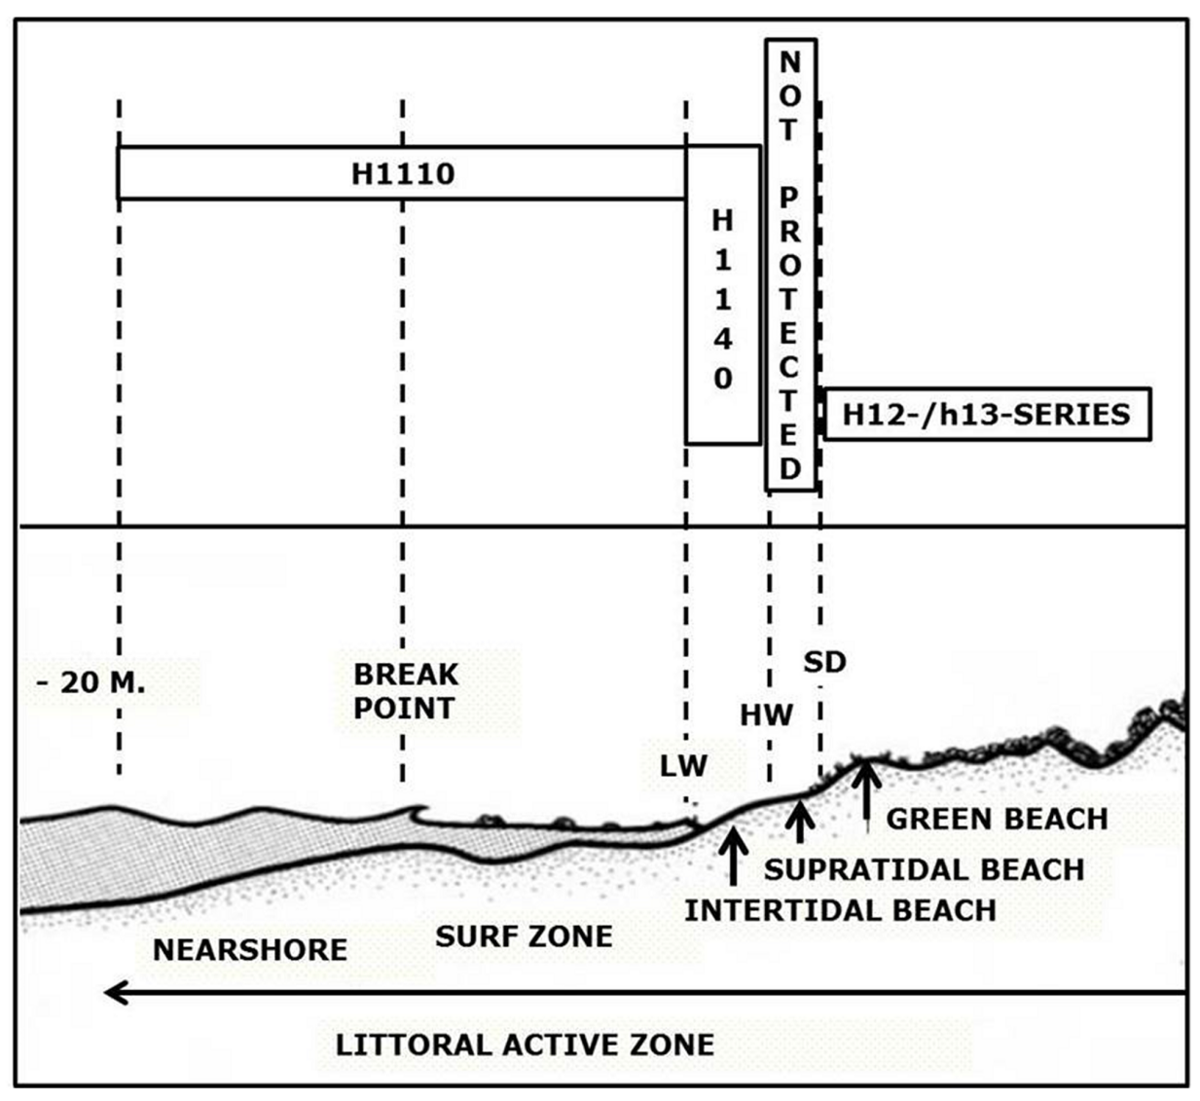 Figure 4. The littoral active zone (after McLachlan & Brown, 2006) with Natura 2000 habitat types. LW = low water linel HW = high water line; SD=storm driftline. The supratidal beach is not or only partly protected under the Birds and Habitats Directive.